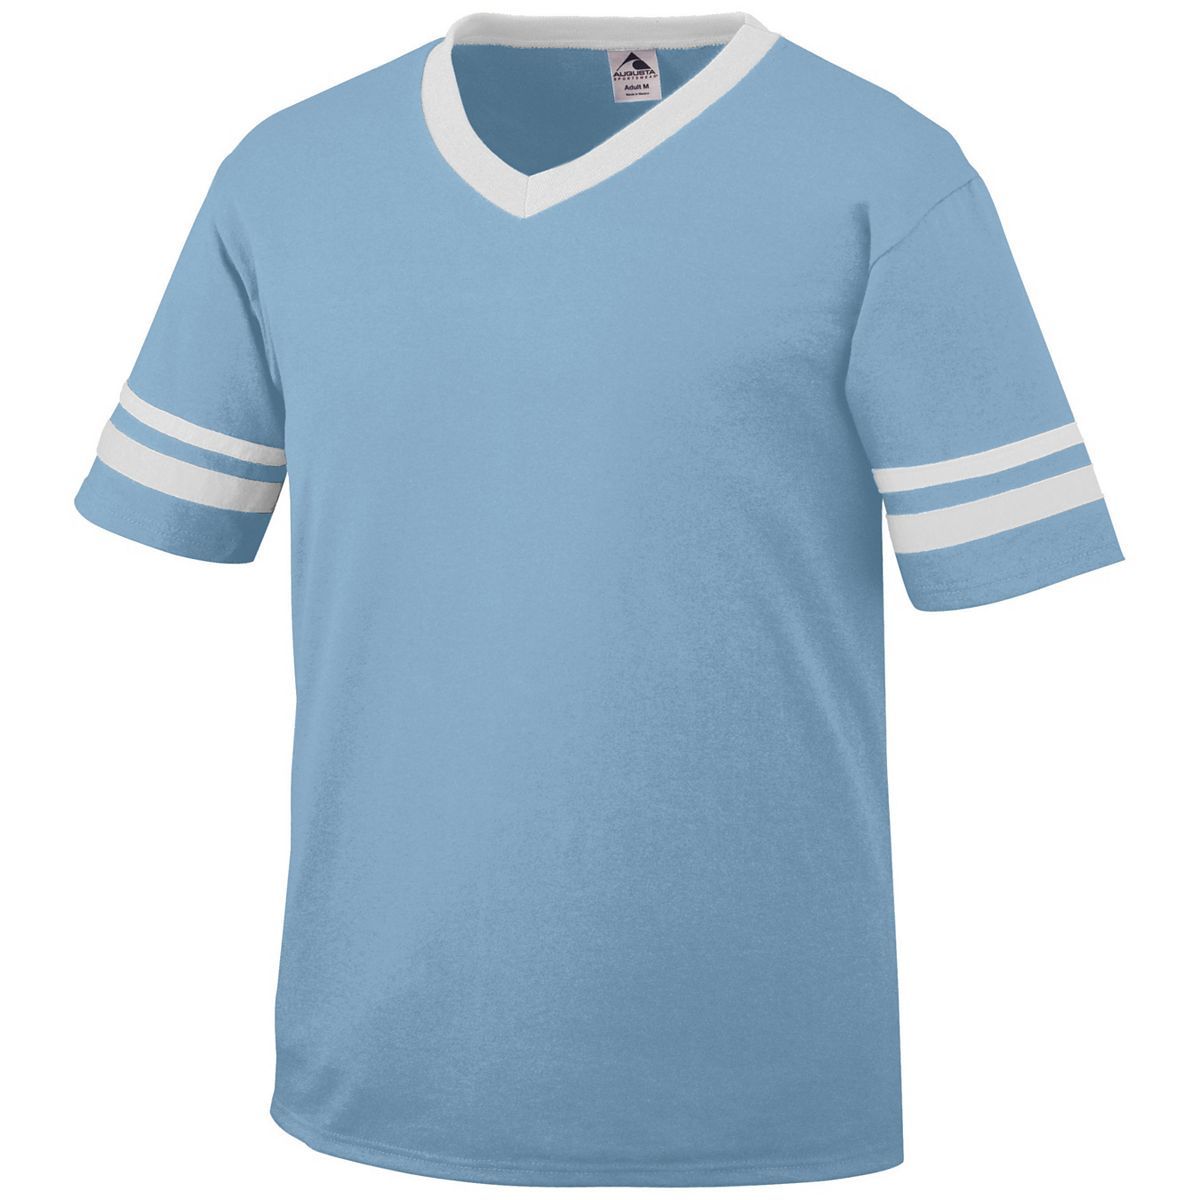 Augusta Sportswear Youth Sleeve Stripe Jersey in Light Blue/White  -Part of the Youth, Youth-Jersey, Augusta-Products, Shirts product lines at KanaleyCreations.com